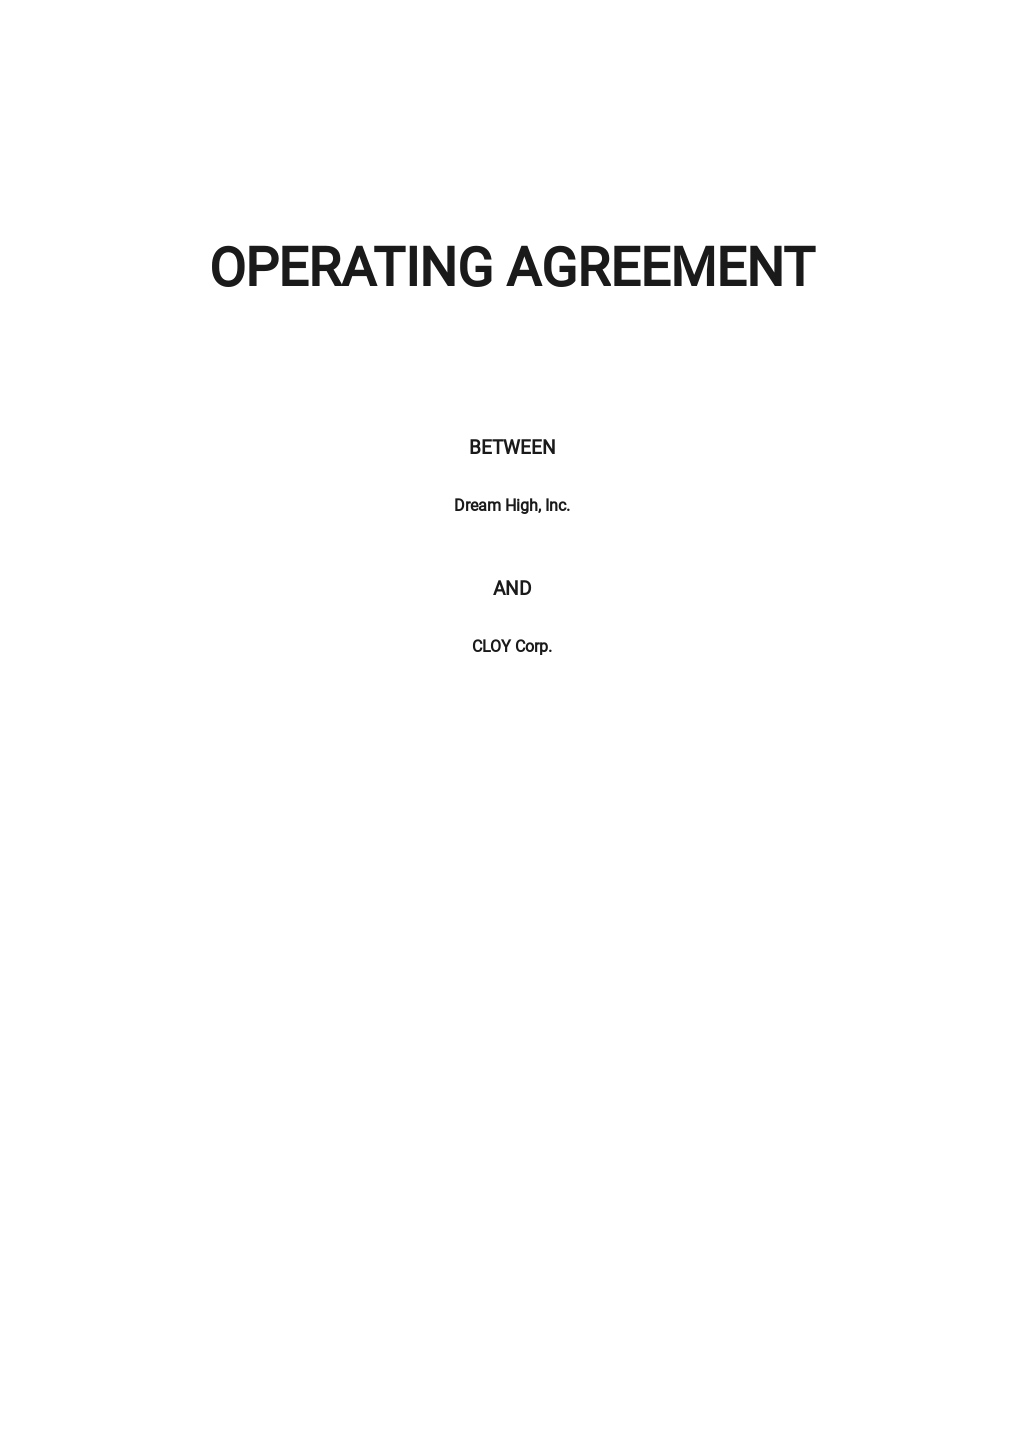 Free Operating Agreement Template.jpe